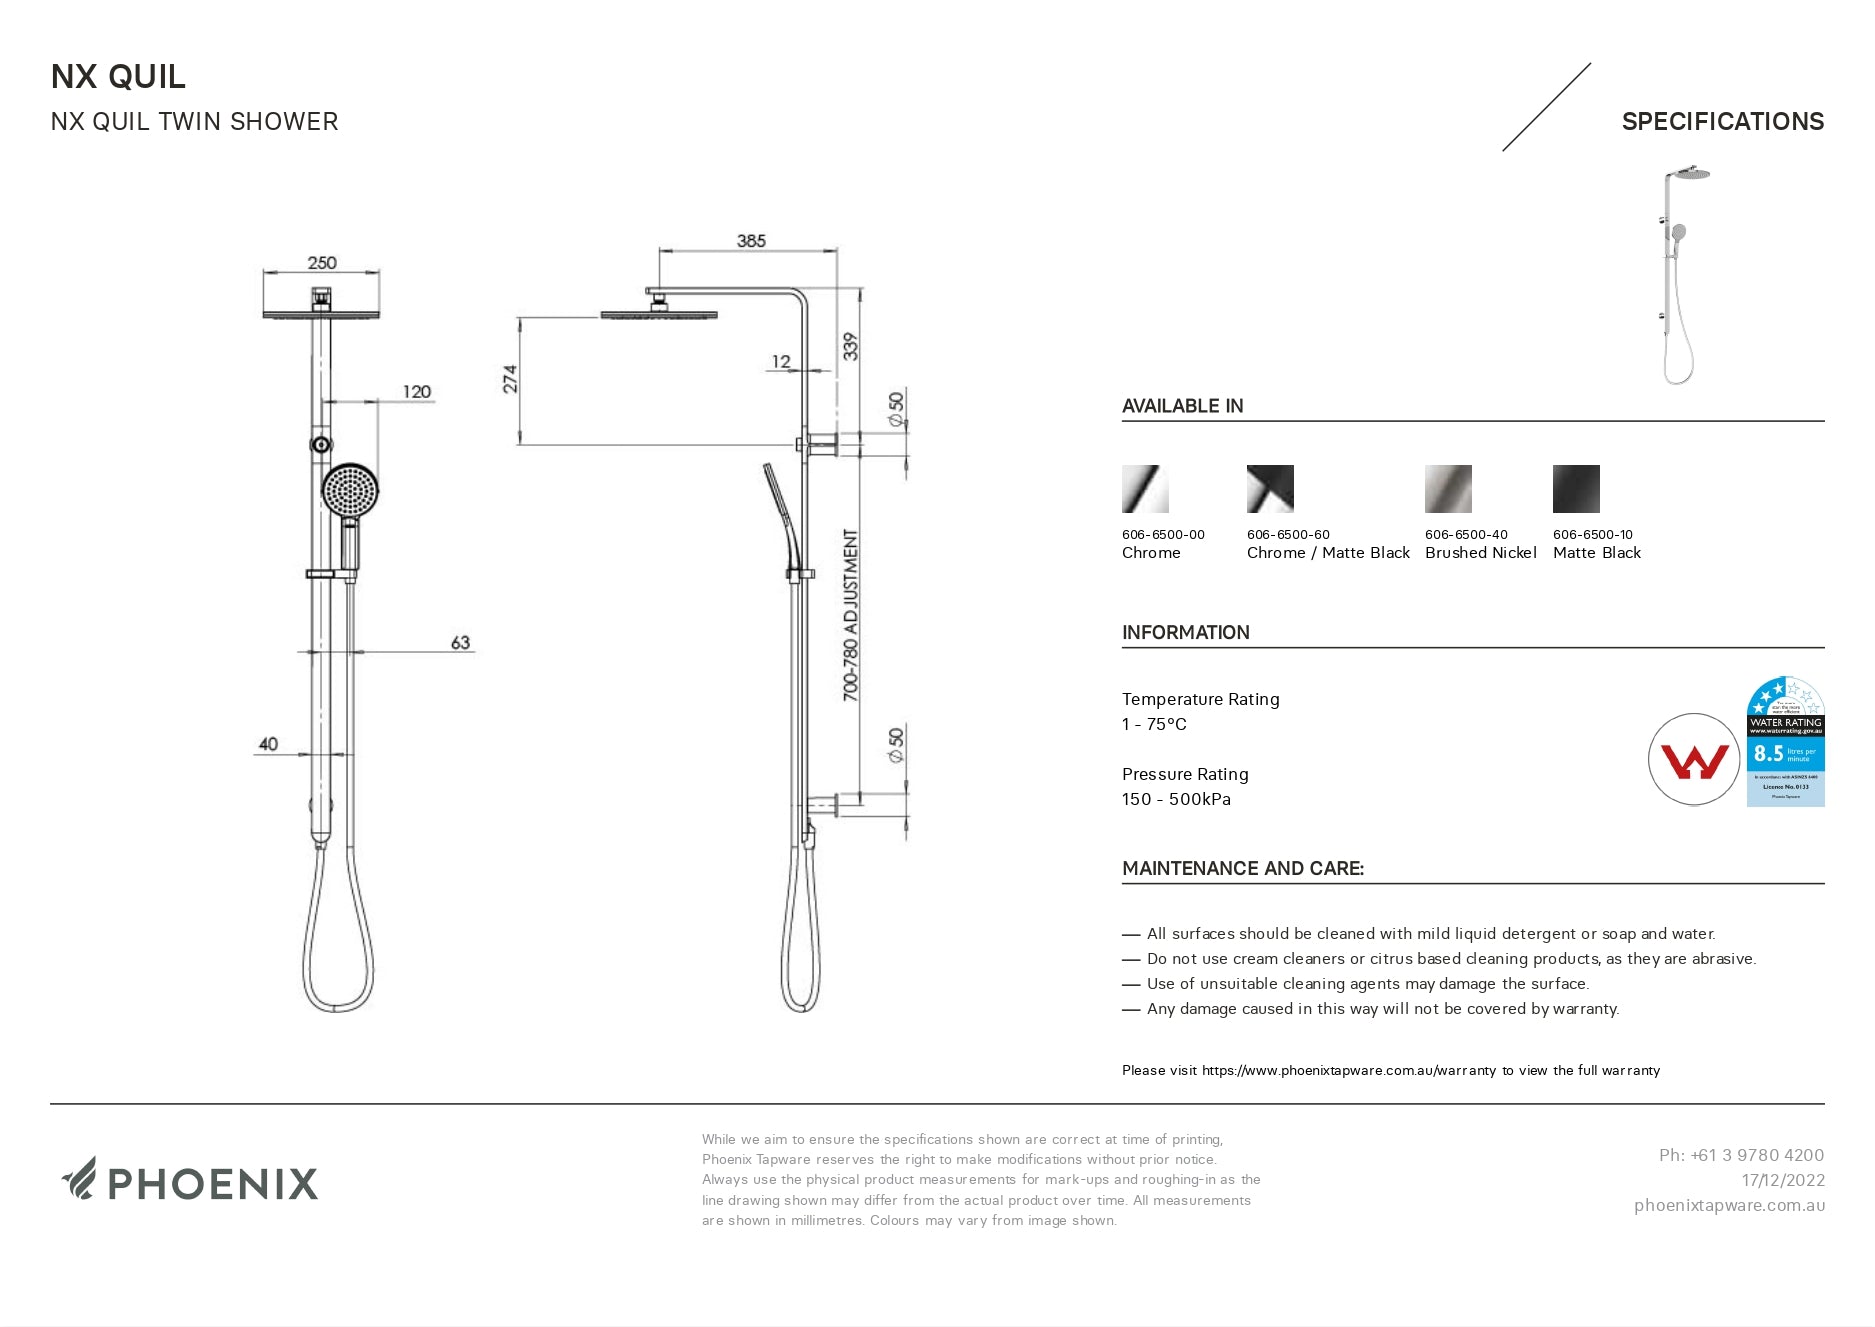 PHOENIX NX QUIL TWIN SHOWER CHROME